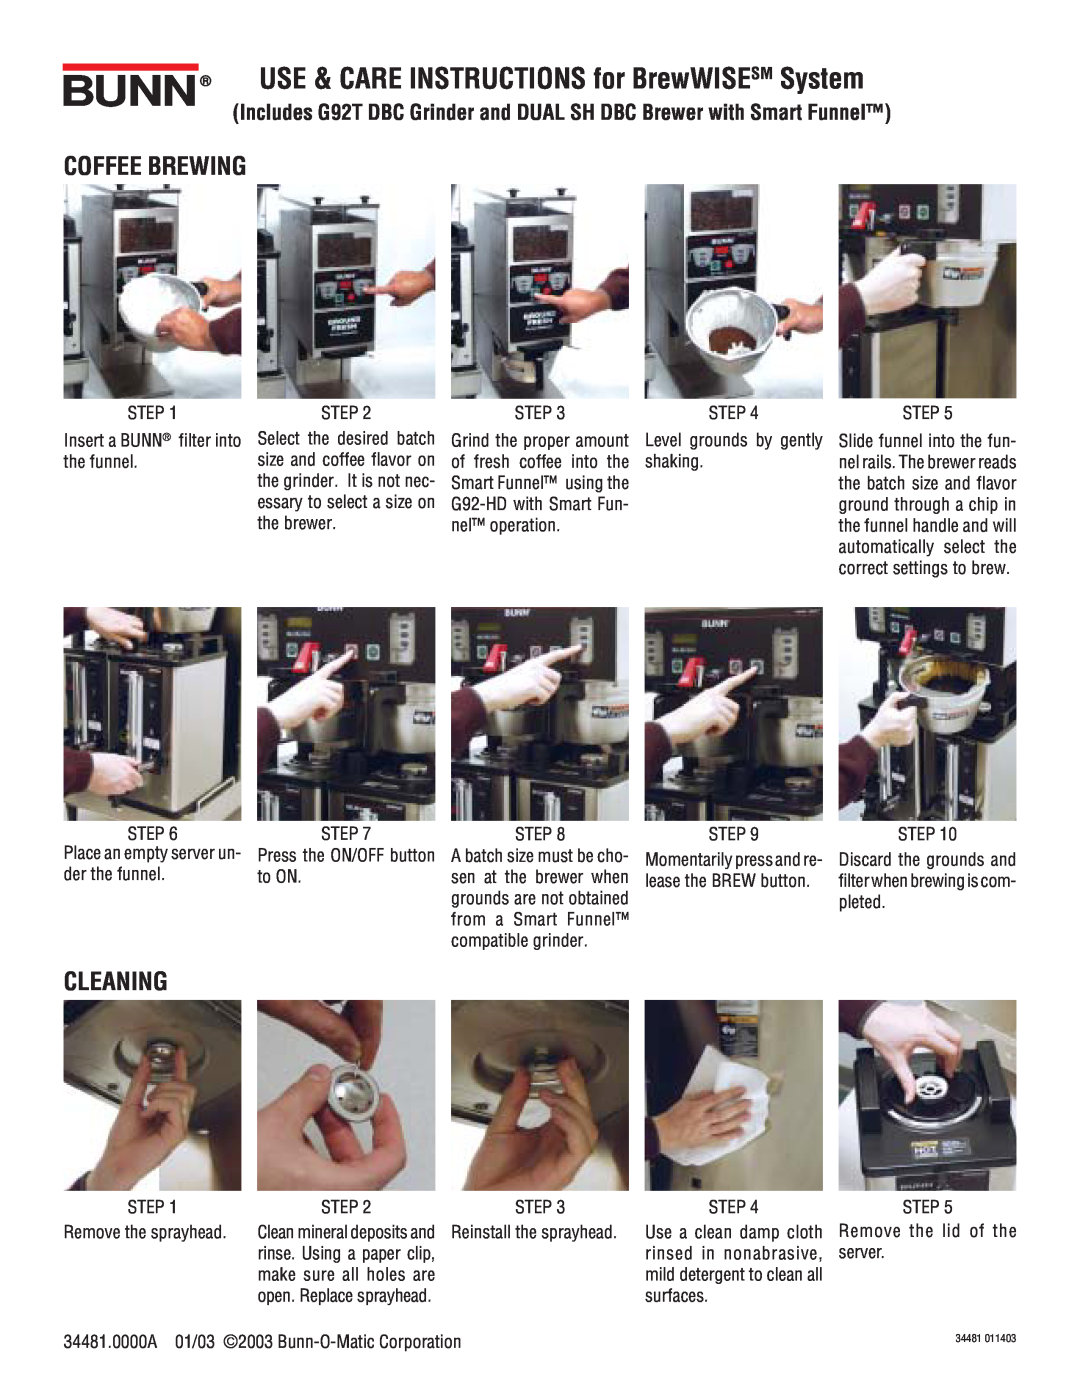 Bunn G92T manual Bunn, Coffee Brewing, Cleaning, USE & CARE INSTRUCTIONS for BrewWISESM System 